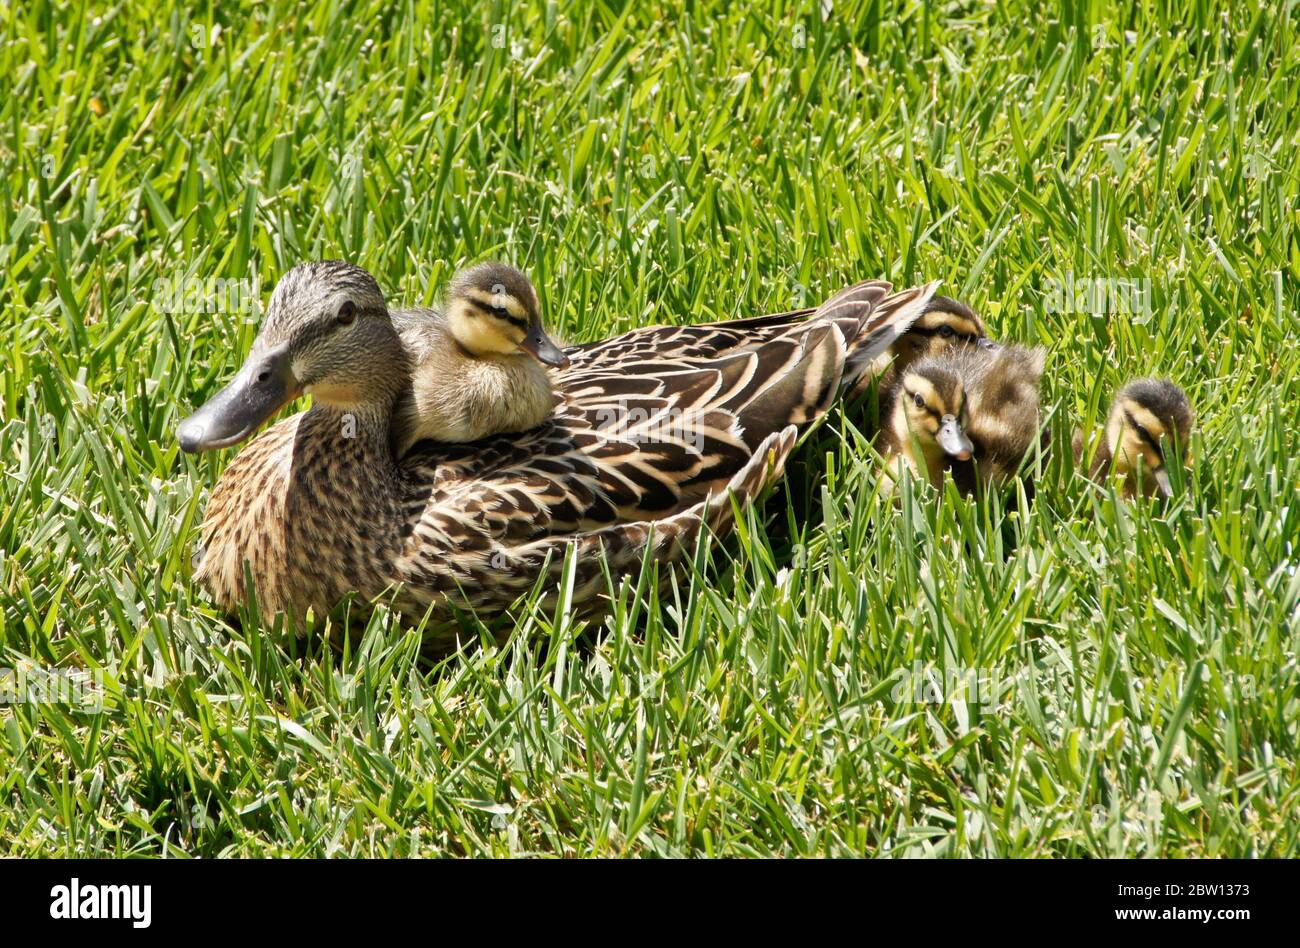 Female (hen) mallard duck and ducklings resting in grass with one duckling sitting on her back, Southern California Stock Photo